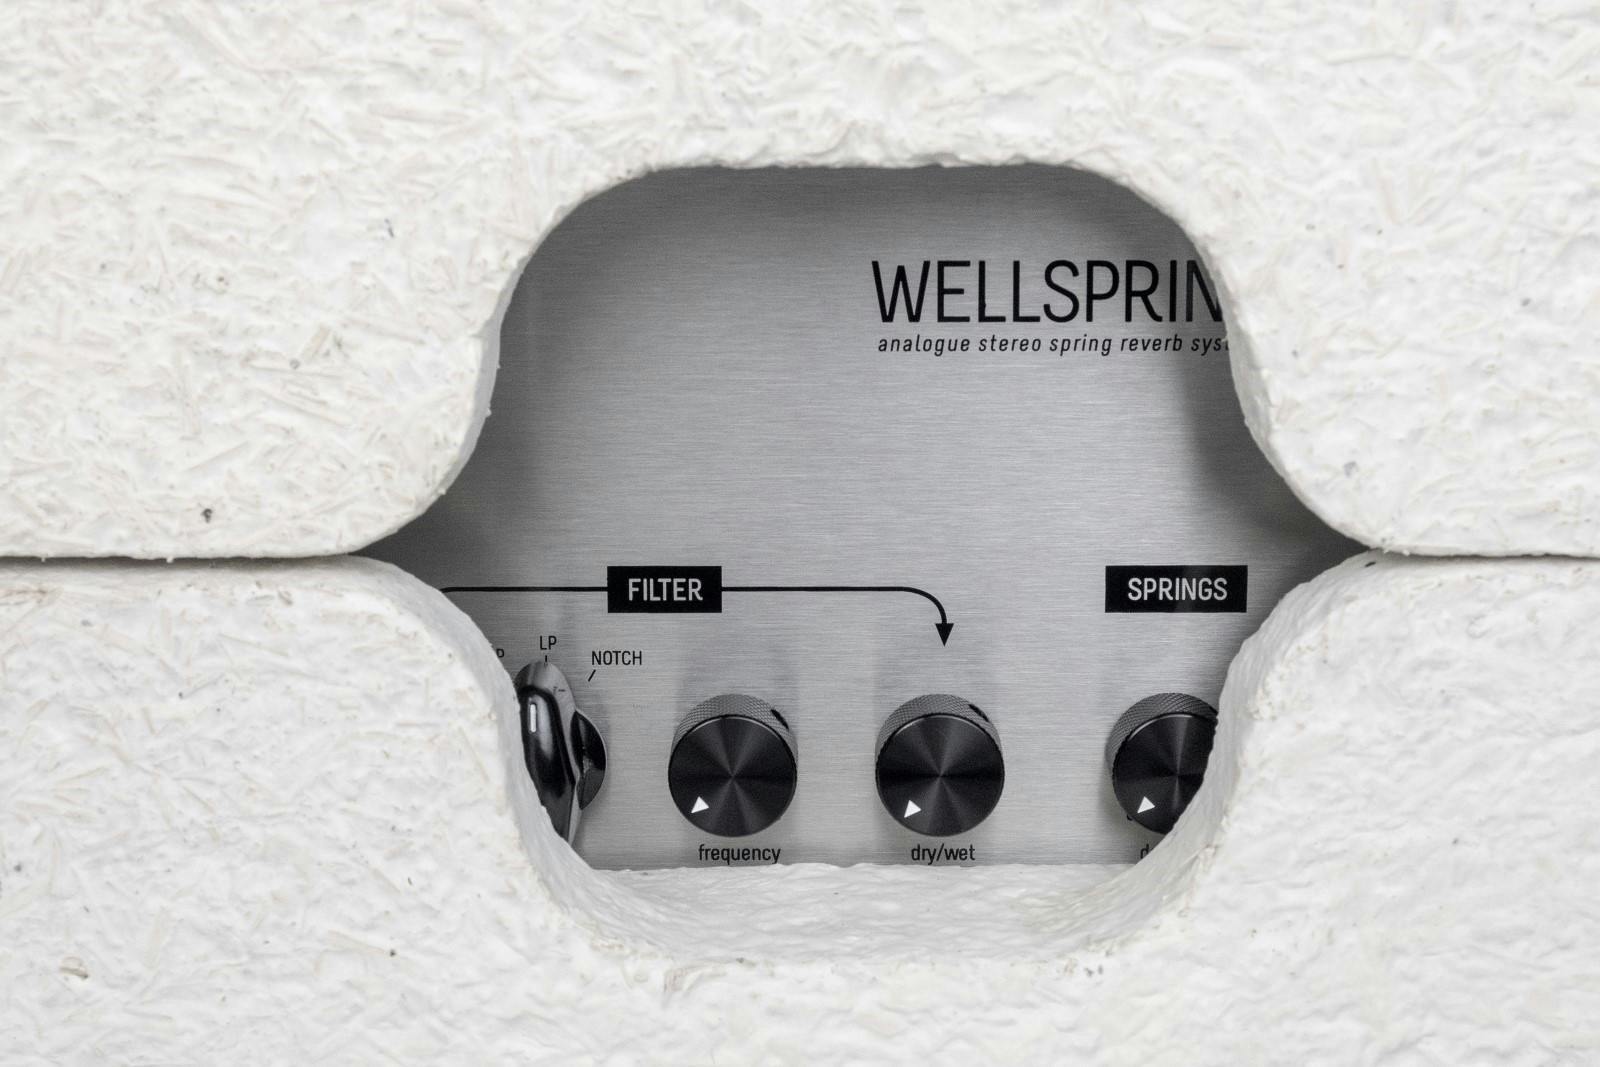 Wellspring hardware in packaging made from mushrooms